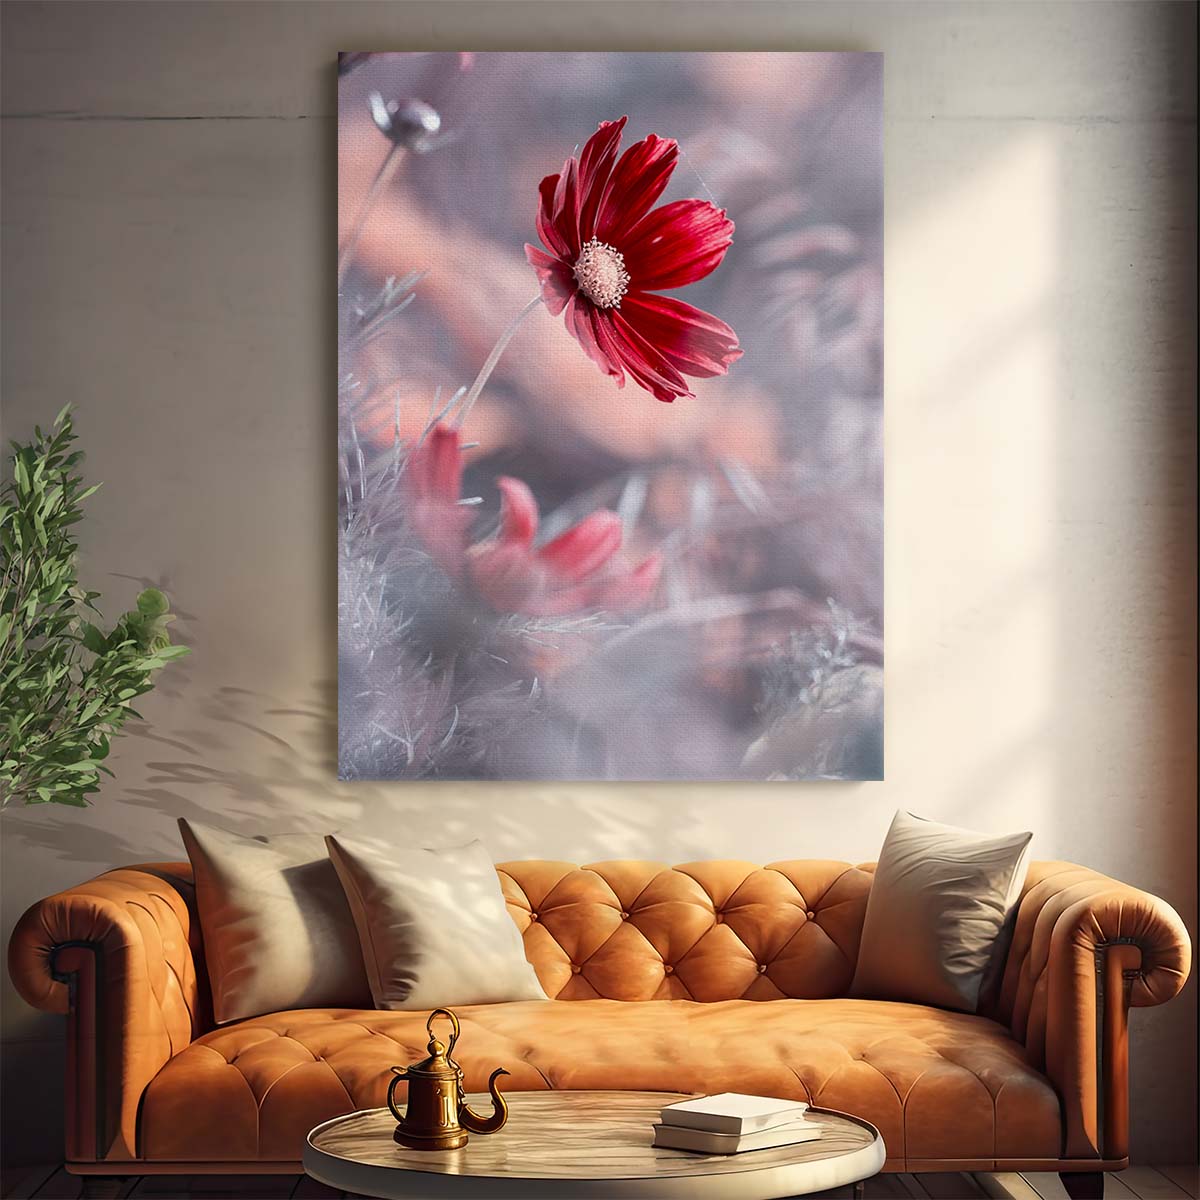 Romantic Red Floral Macro Photography - Passionate Valentine Blossom Art by Luxuriance Designs, made in USA